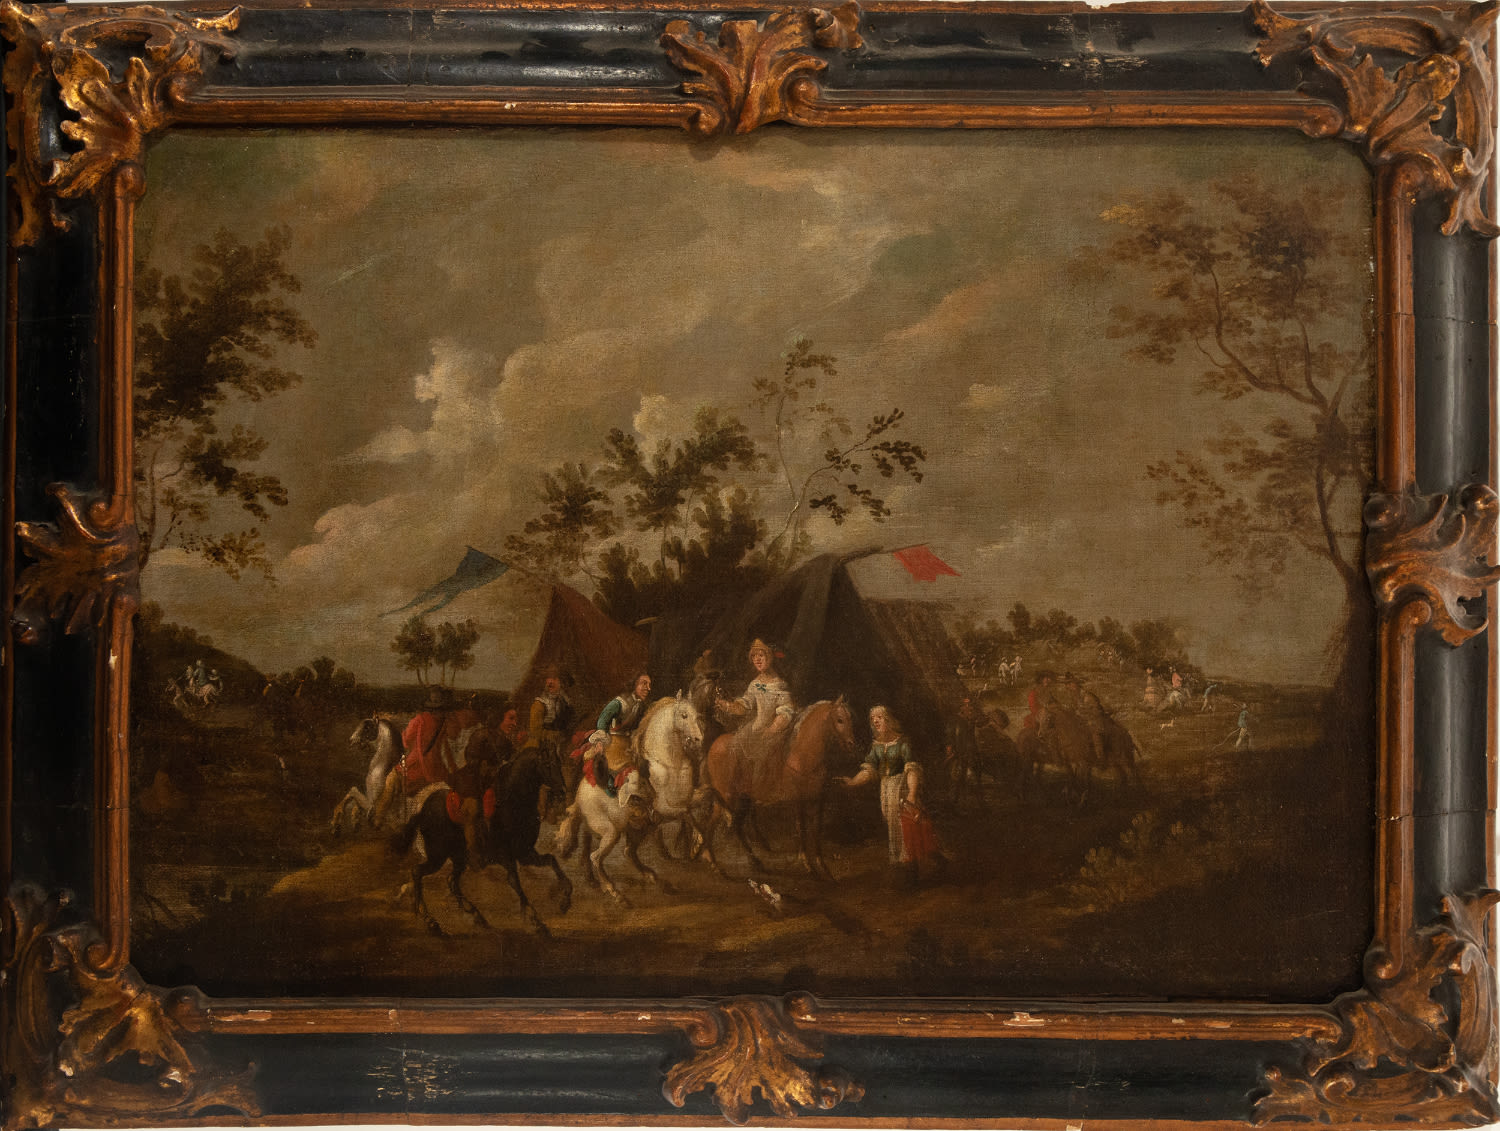 Cavalry scene, Dutch school from the second half of the 17th century - Image 2 of 12